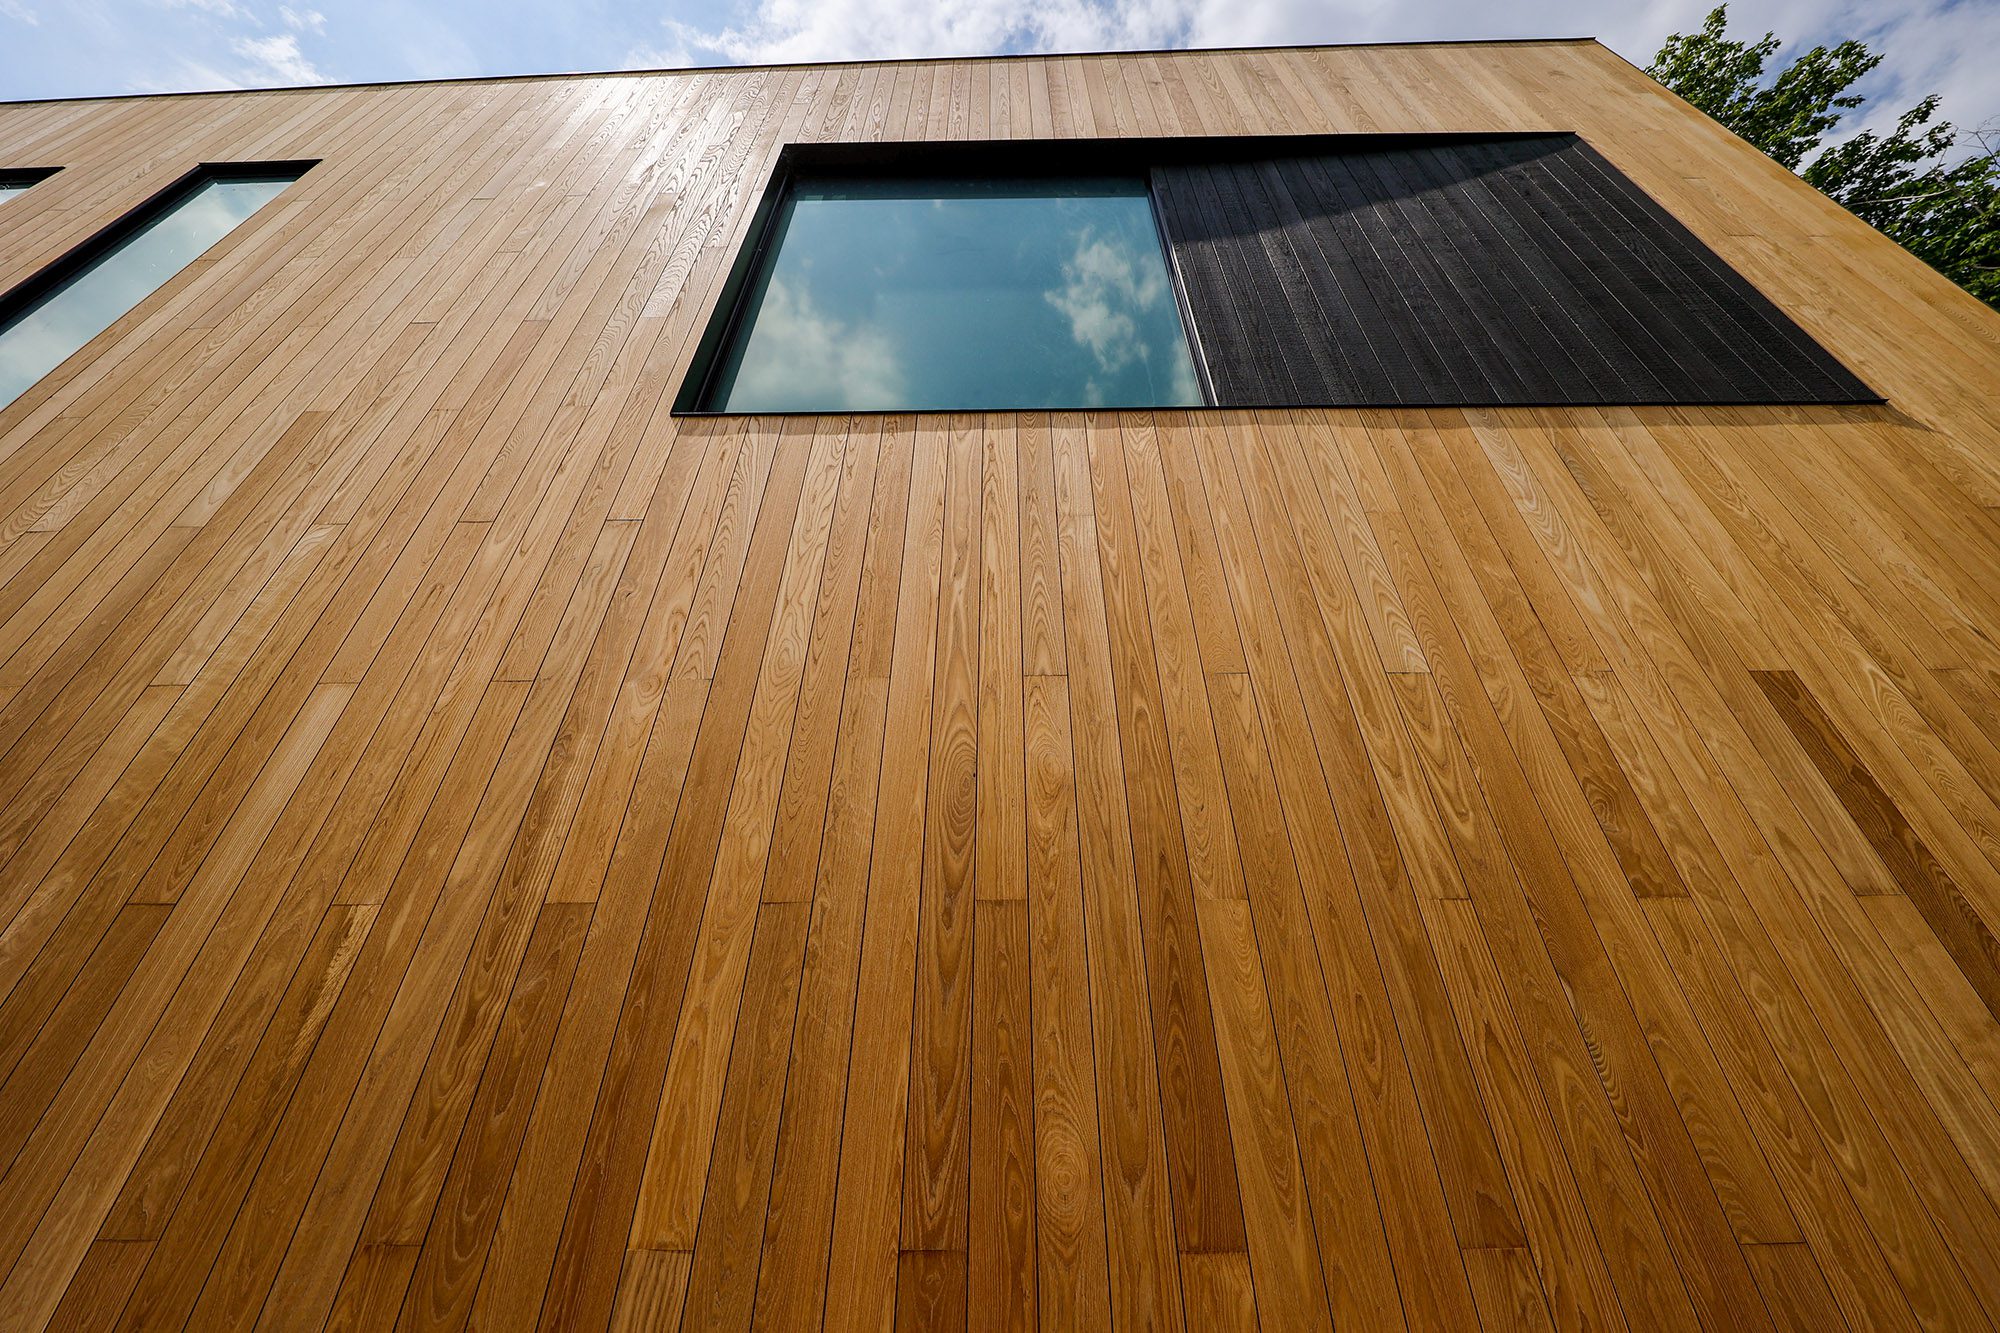 thermally modified wood siding